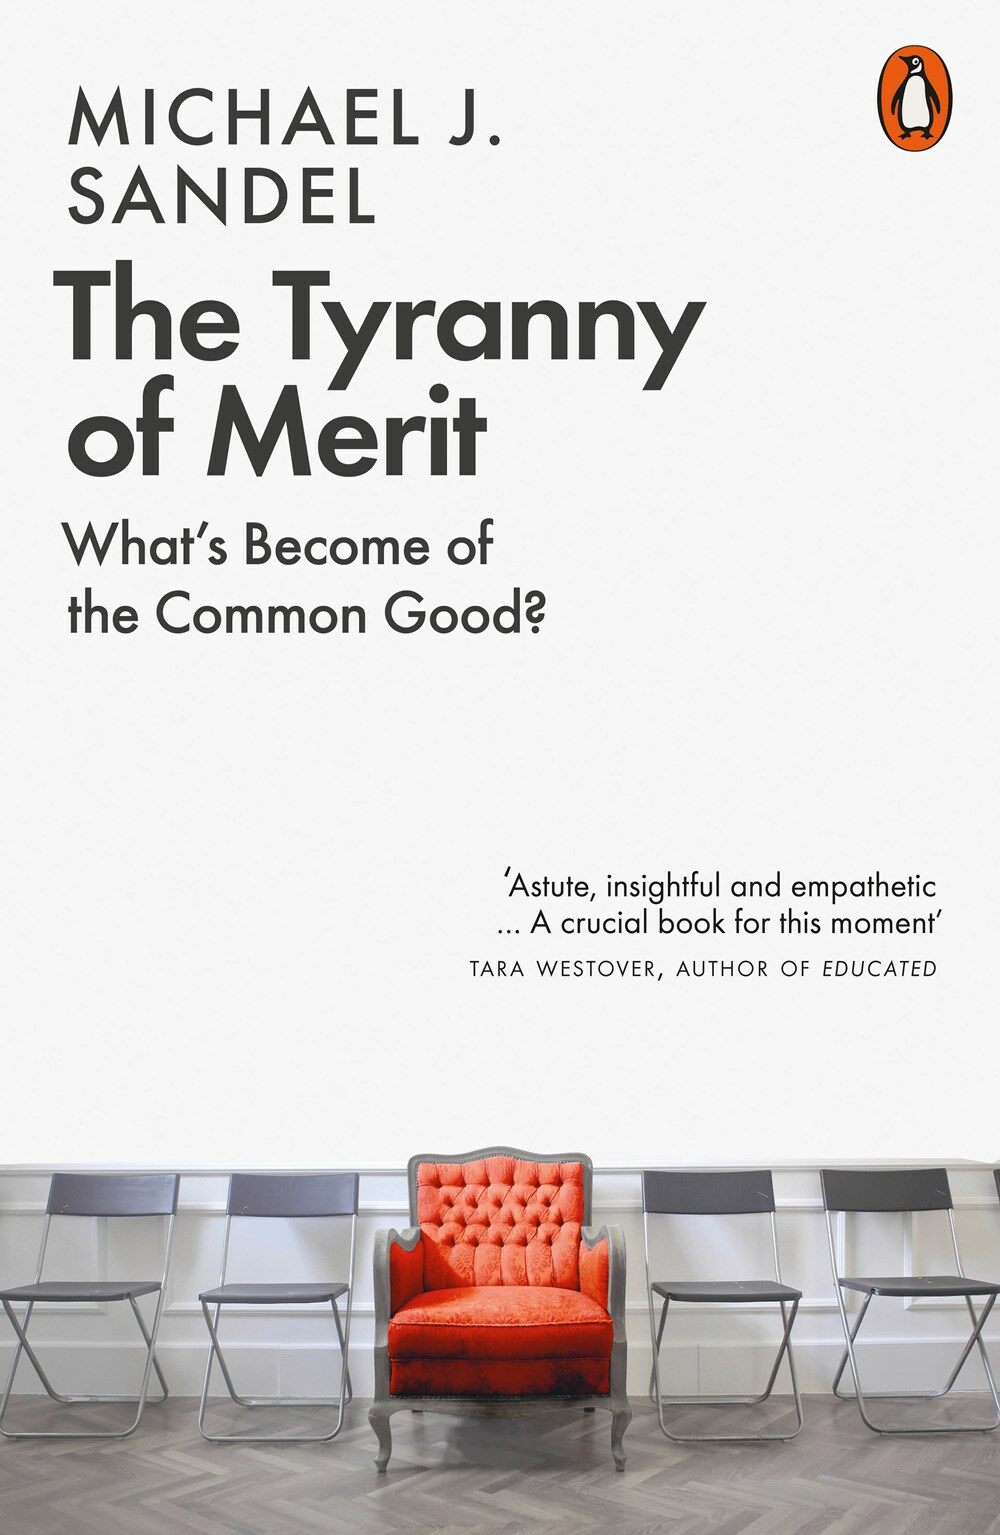 The Tyranny of Merit : Whats Become of the Common Good? (Paperback)